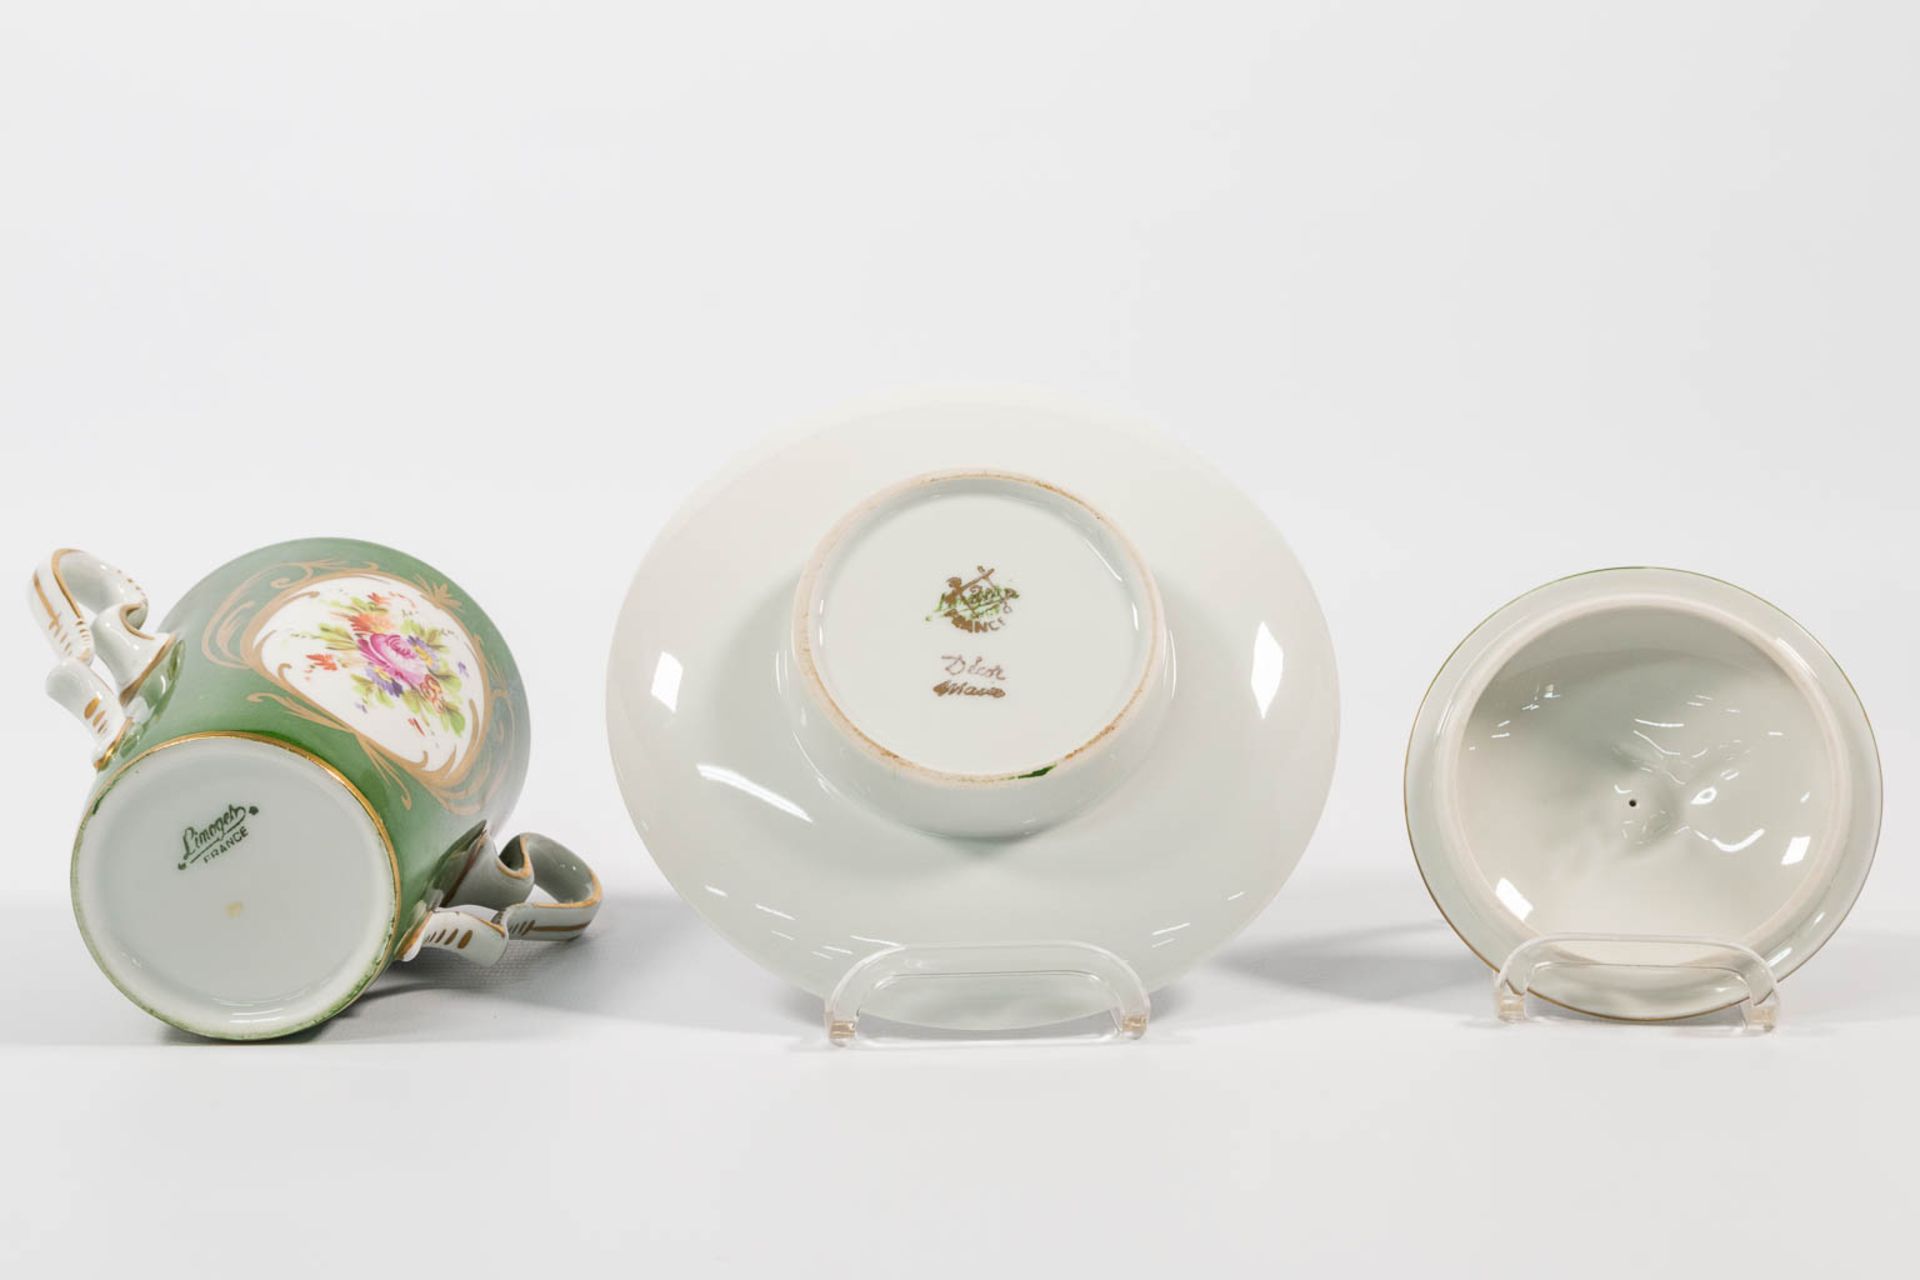 A tremble cup and sugarpot, made of hand-painted porcelain with a flower decor and marked JD Limoges - Image 5 of 11